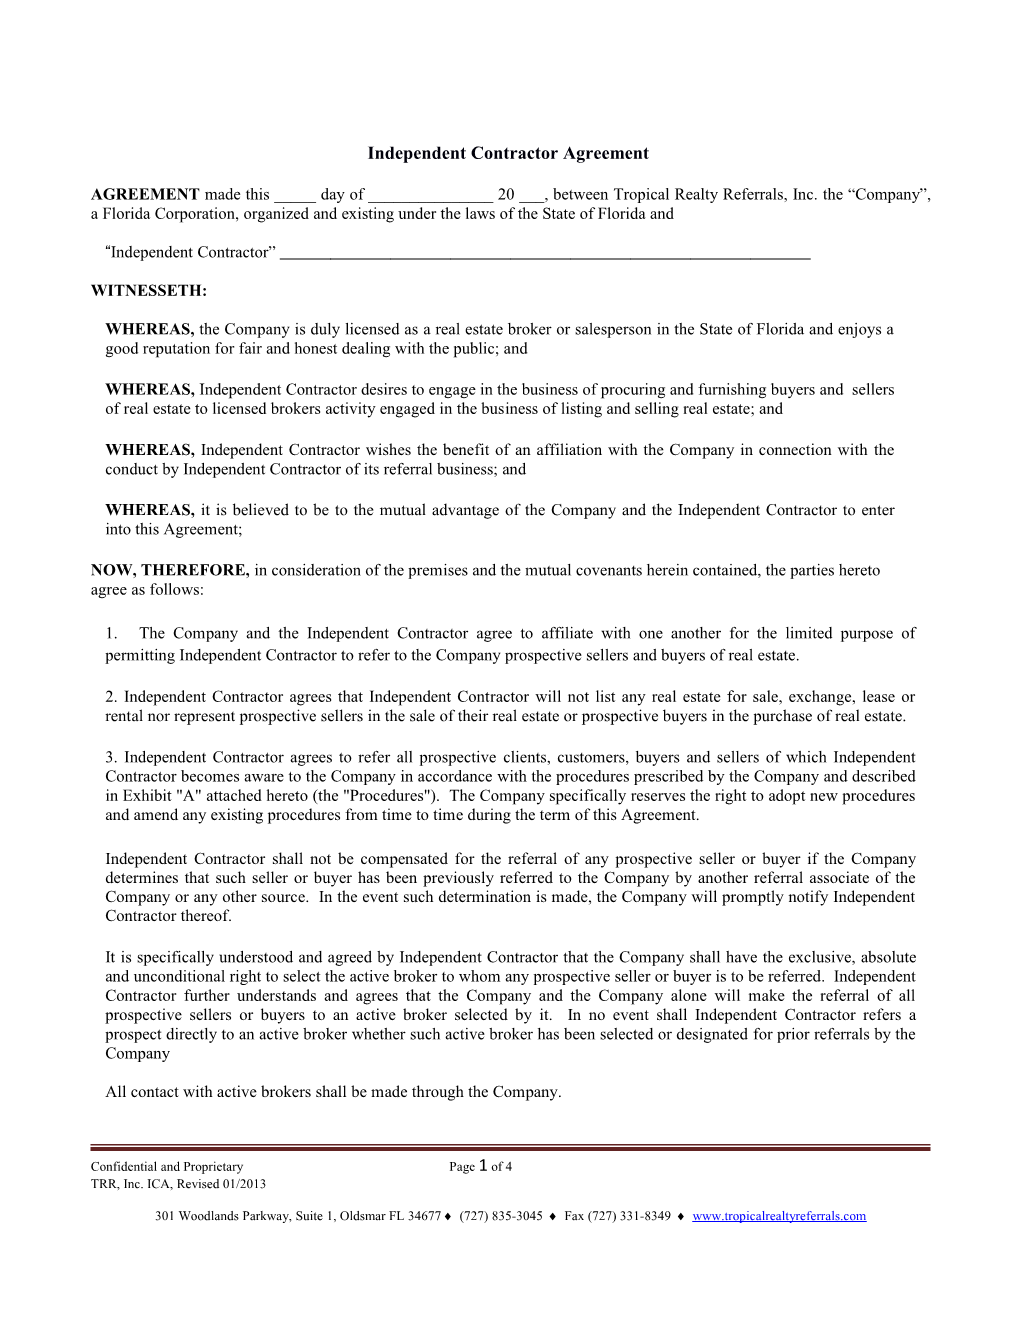 Independent Contractor Agreement s3